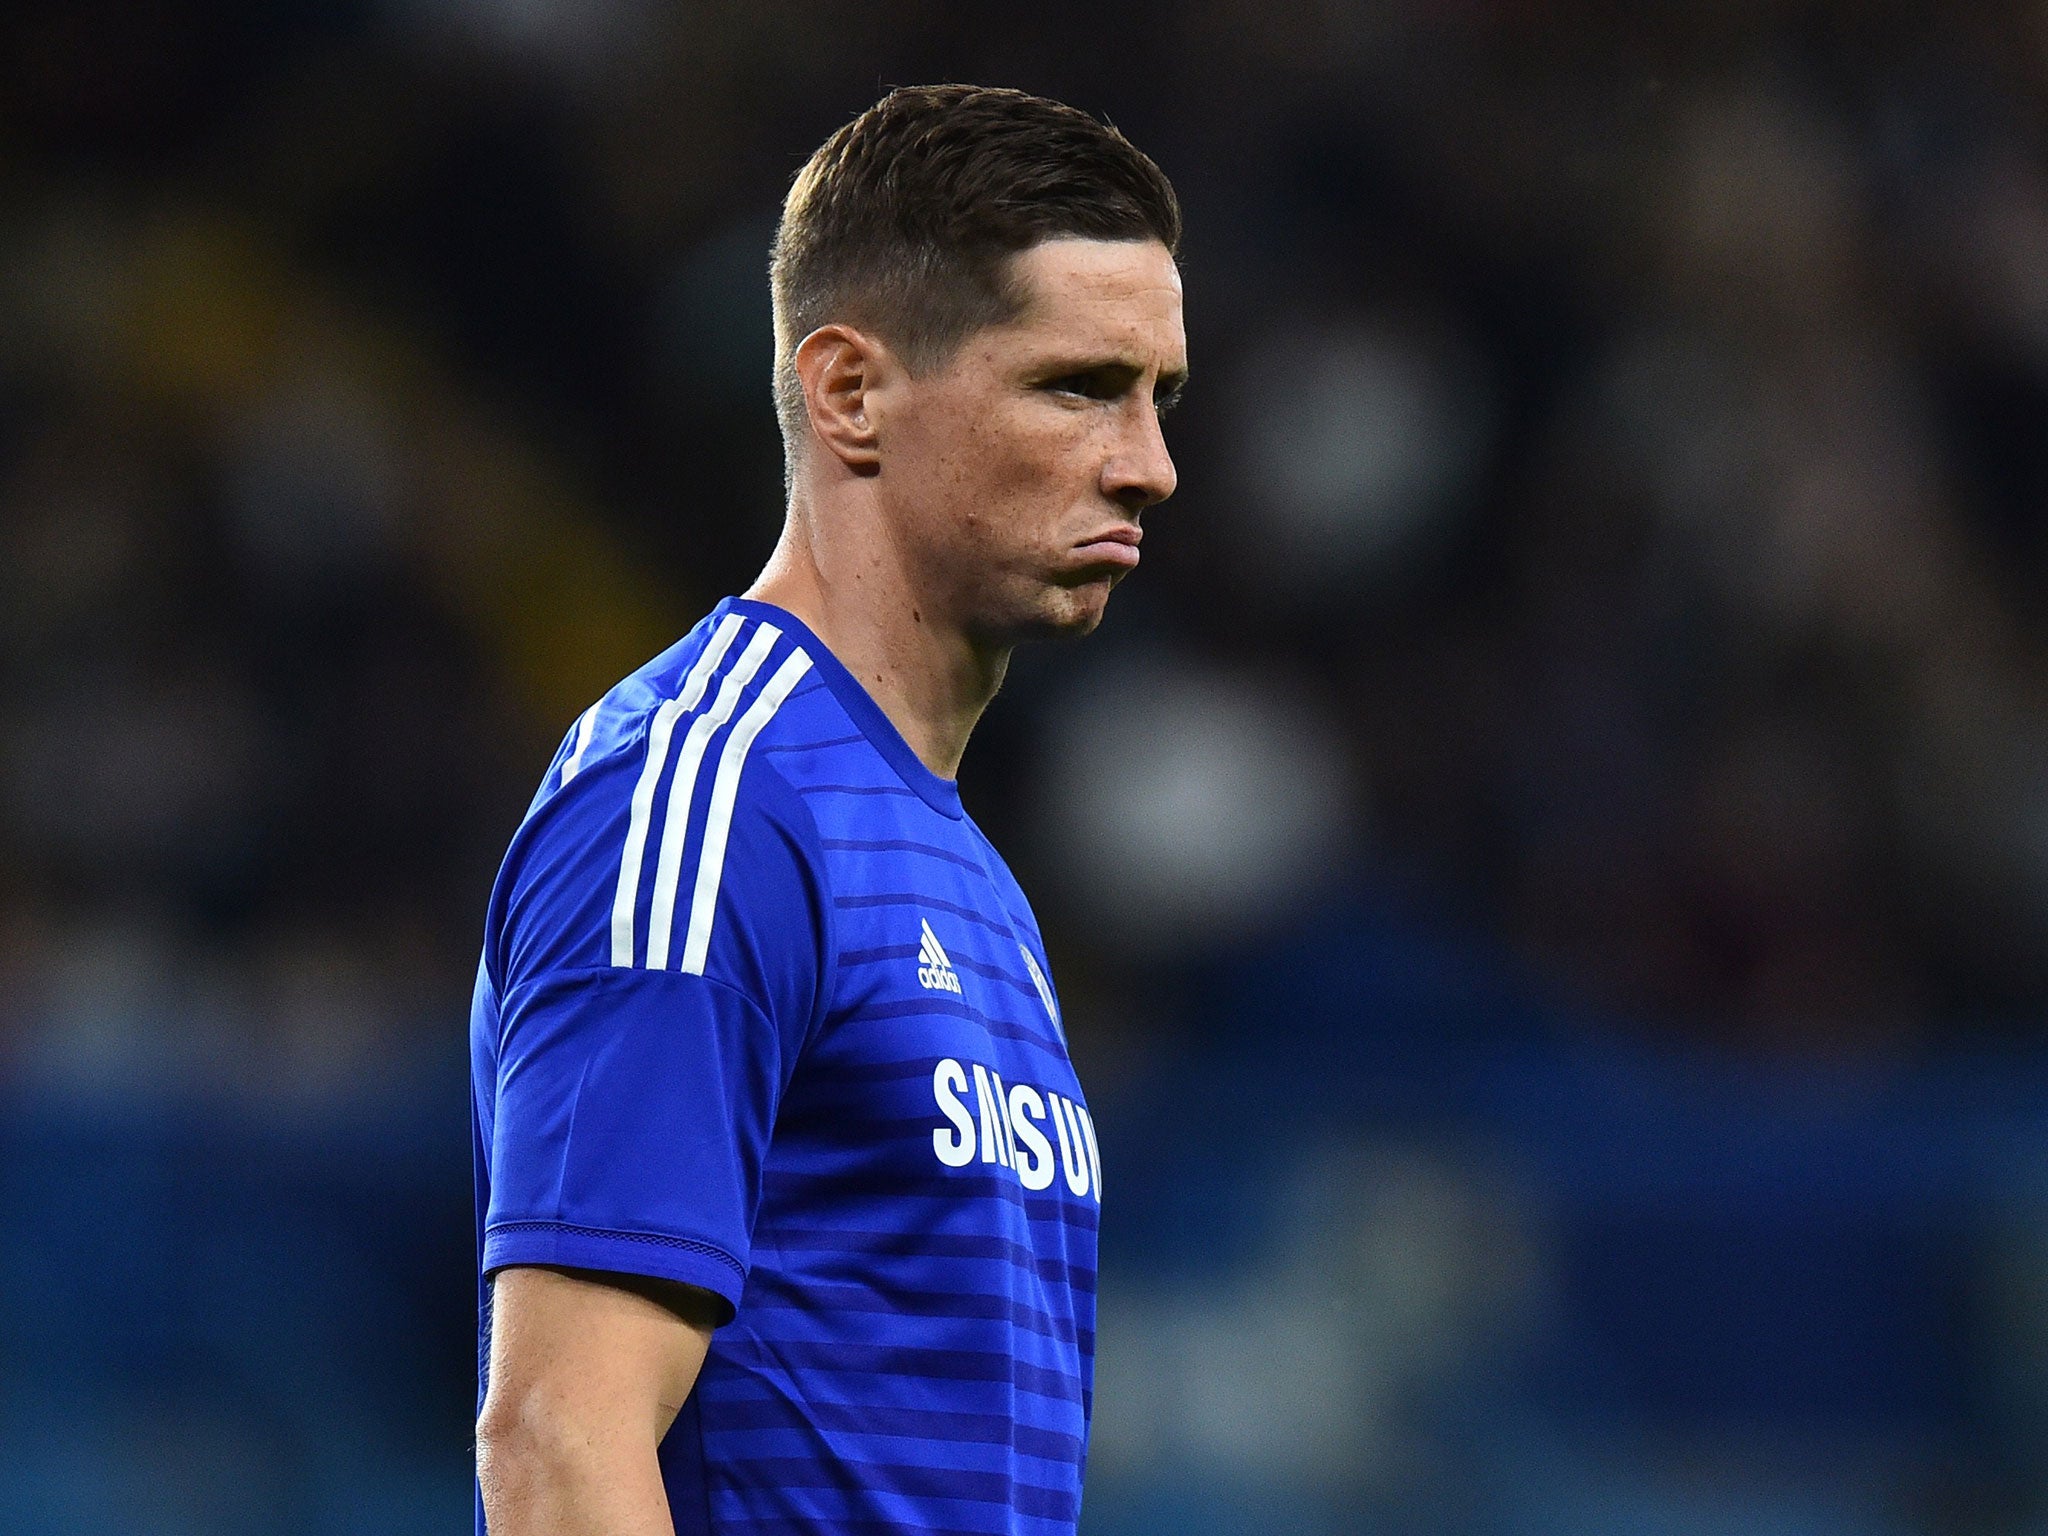 Fernando Torres is set to move to AC Milan